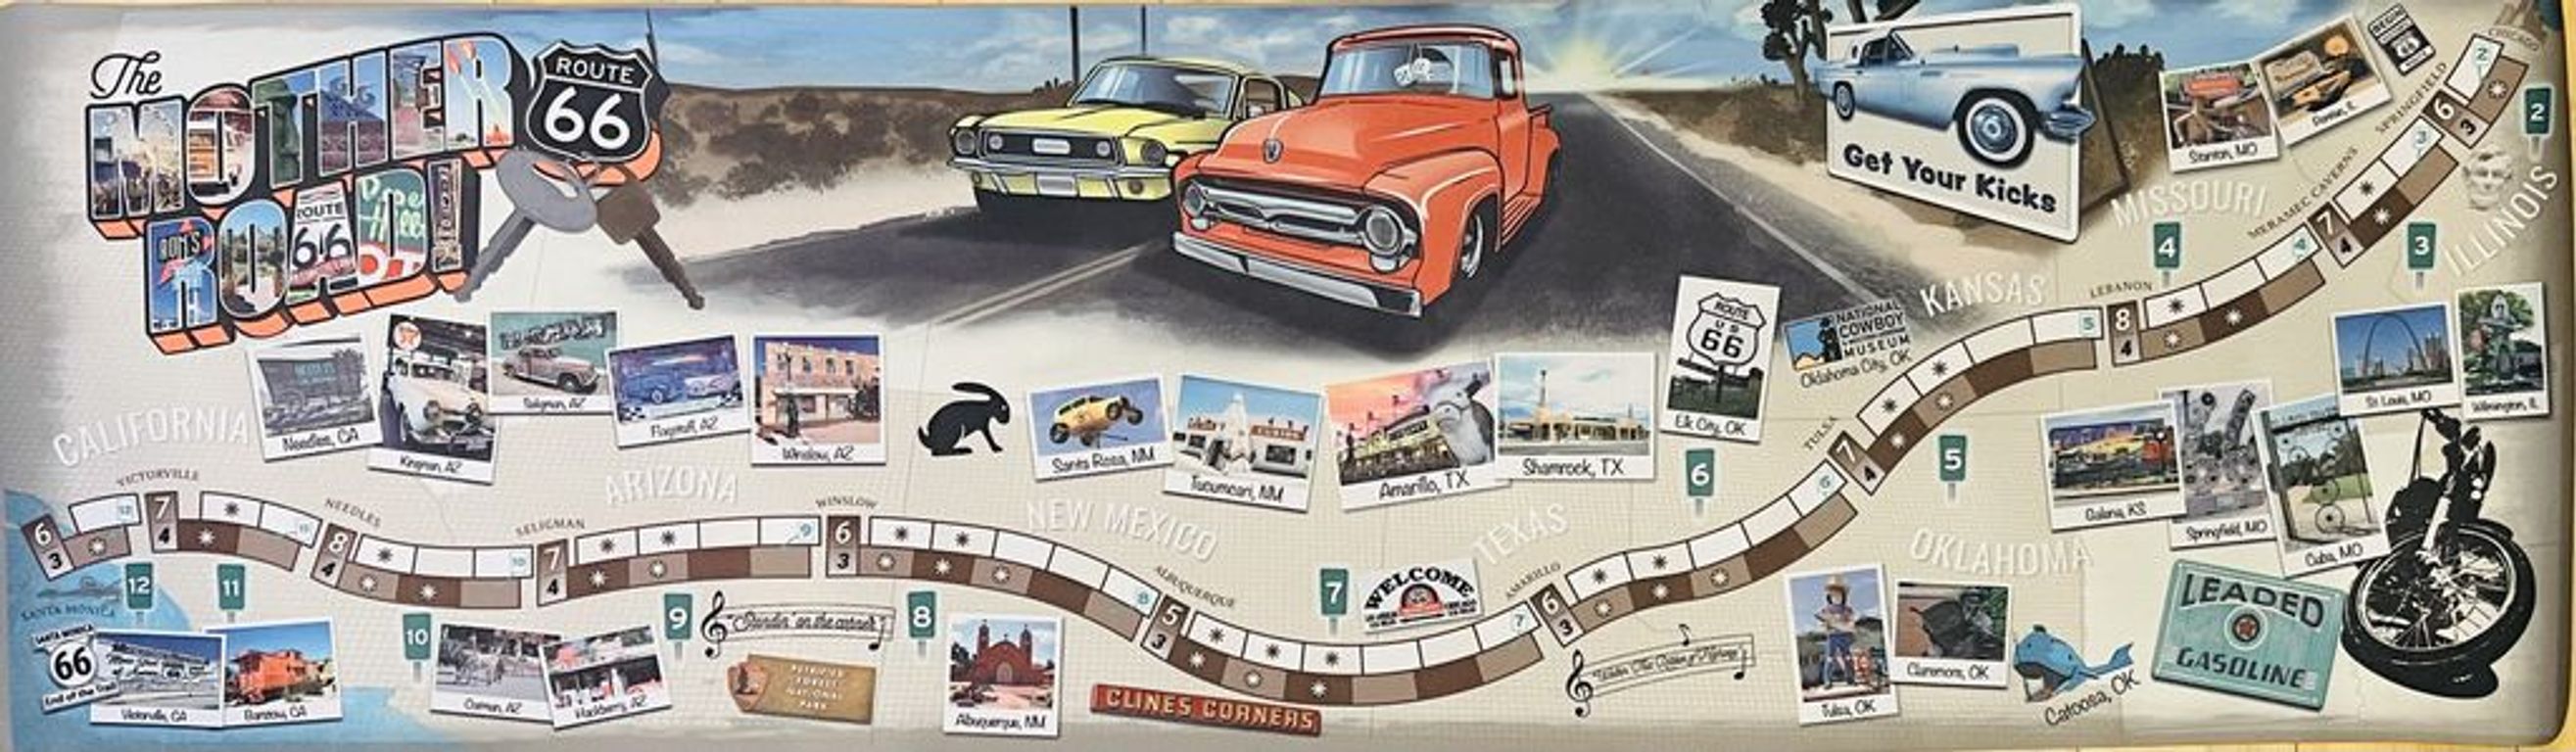 The Mother Road: Route 66 spelbord